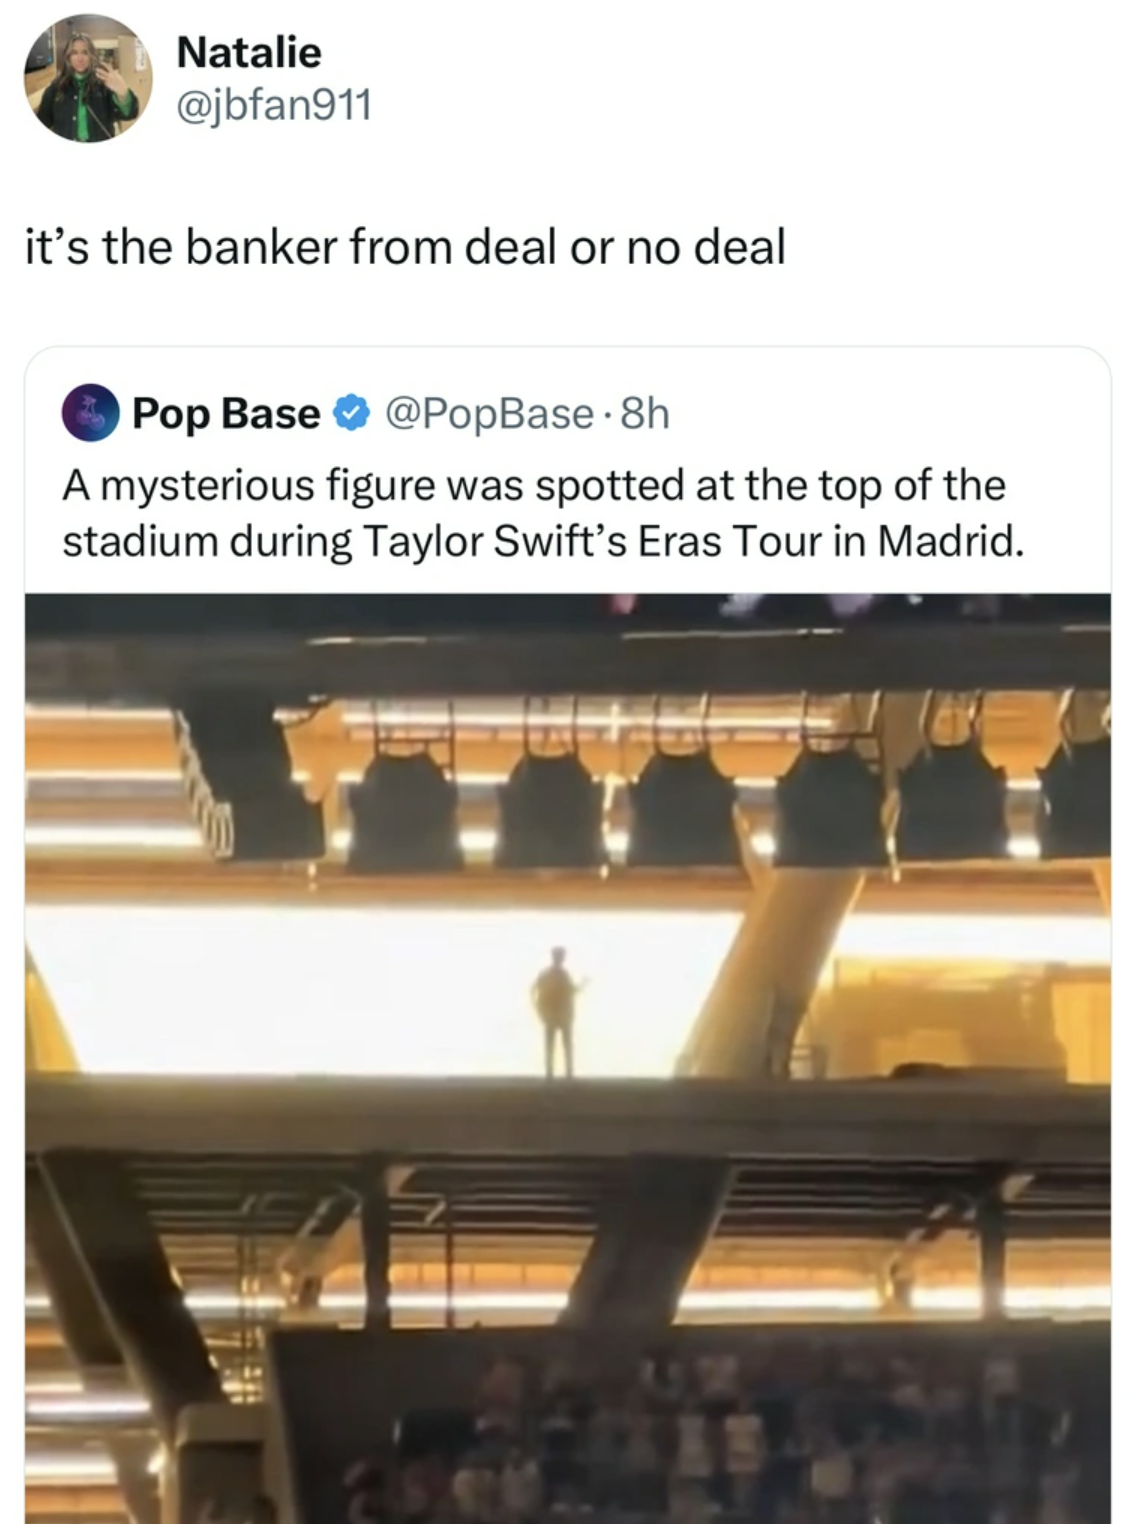 Taylor Swift - Natalie it's the banker from deal or no deal Pop Base A mysterious figure was spotted at the top of the stadium during Taylor Swift's Eras Tour in Madrid.